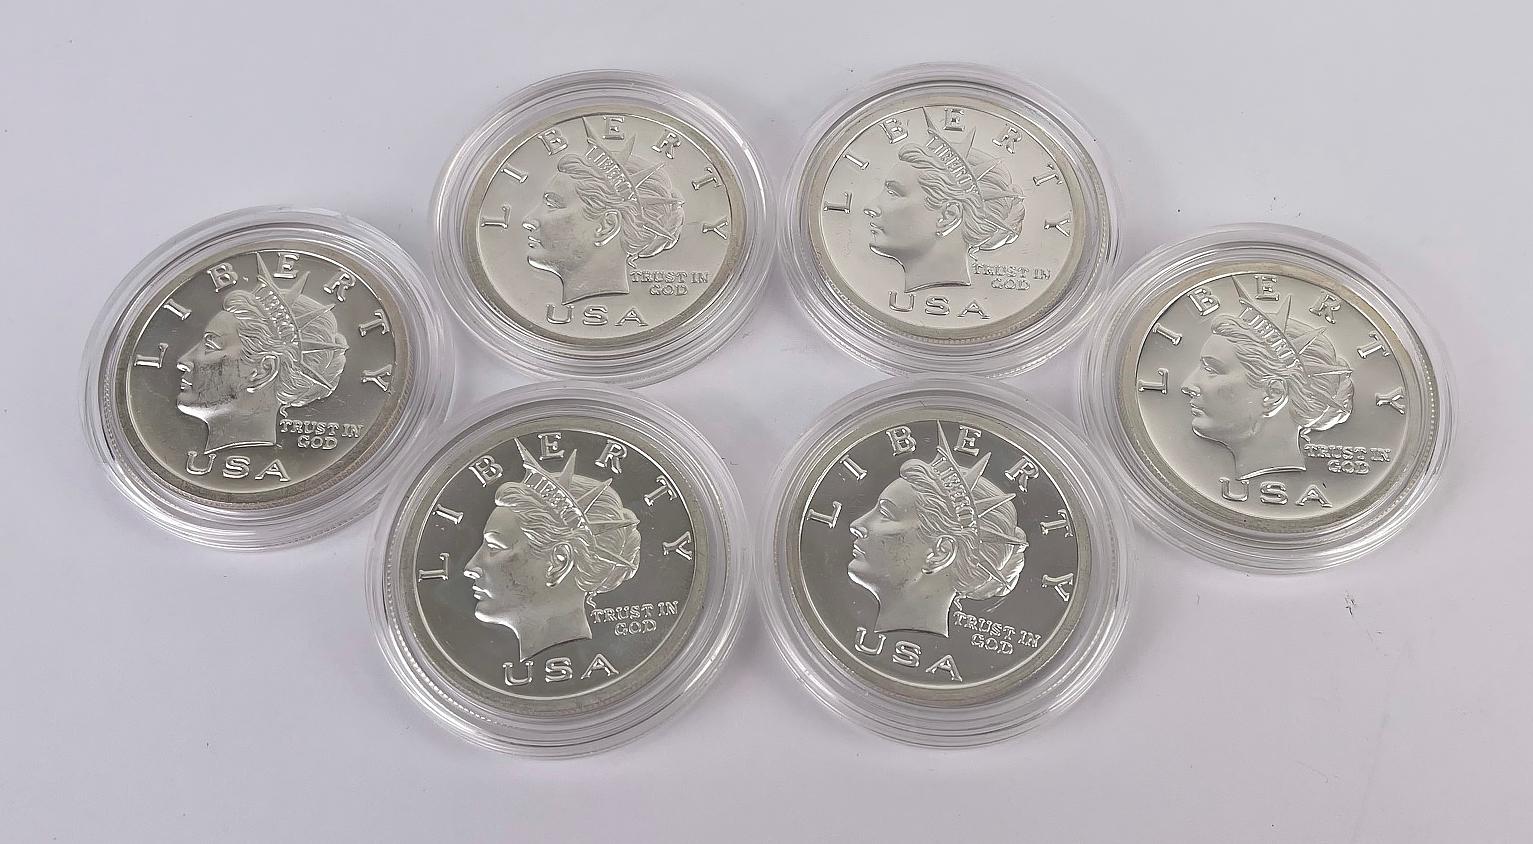 Norfed 1oz Silver Rounds $20 Liberty Dollars